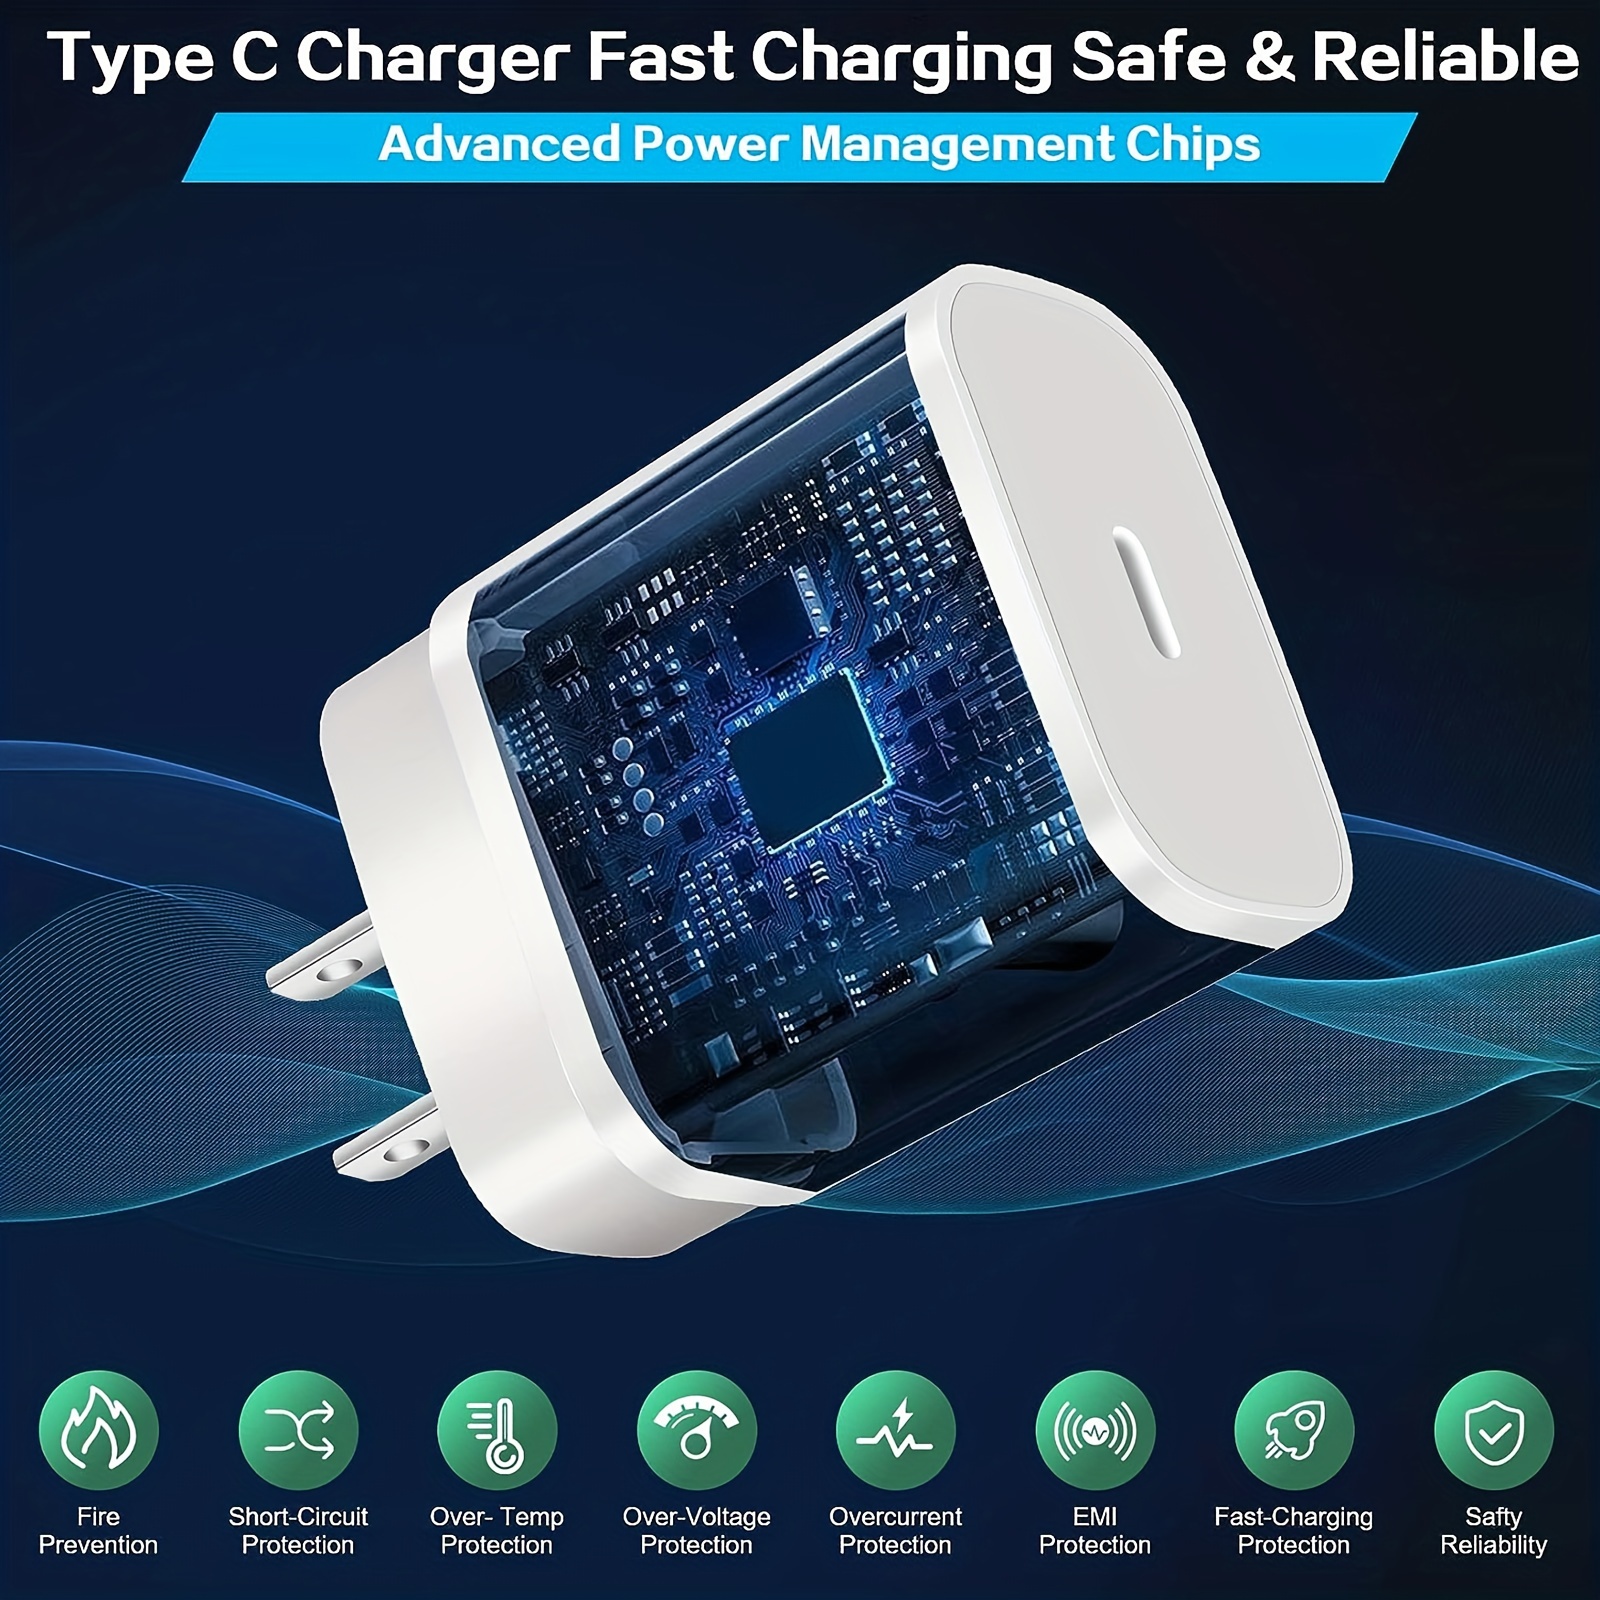 usb c charger super fast charging type c android phone charger with cable cord for samsung galaxy s23 ultra s23 s23 s22 s22 ultra s22 note 10 20 s20 s21 galaxy tab s7 s8 details 4